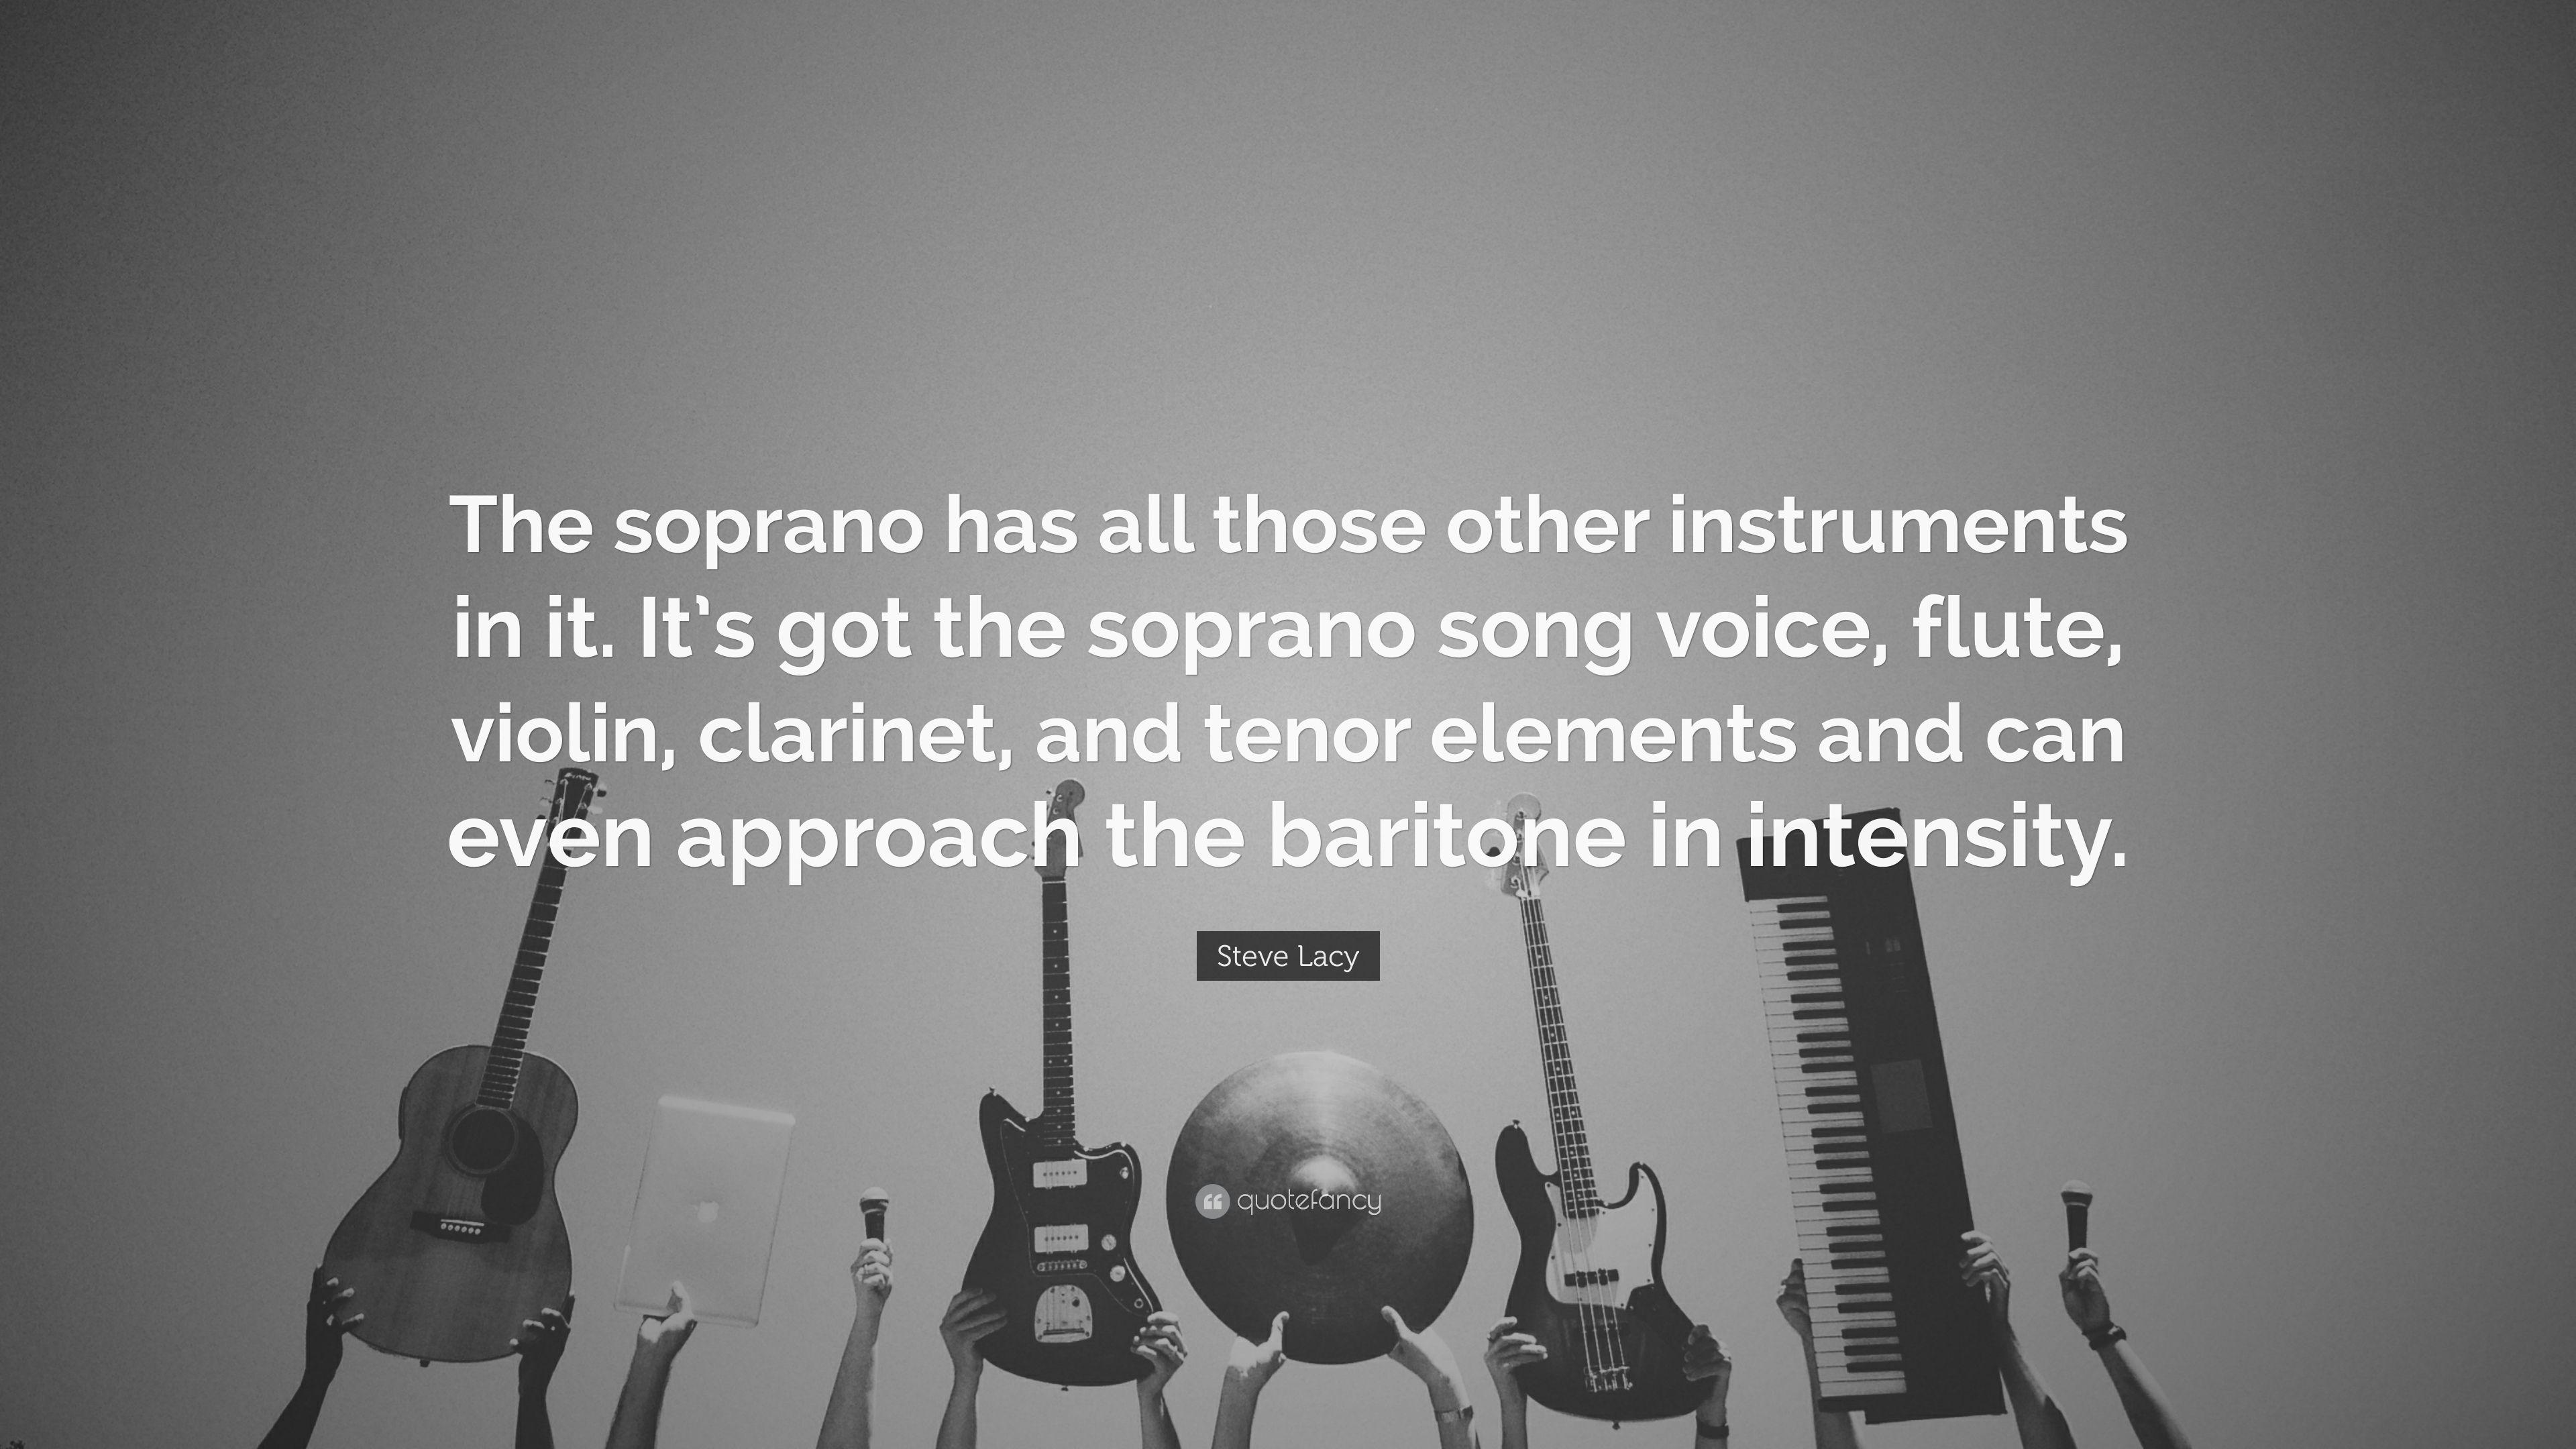 Steve Lacy Quote: “The soprano has all those other instruments in it